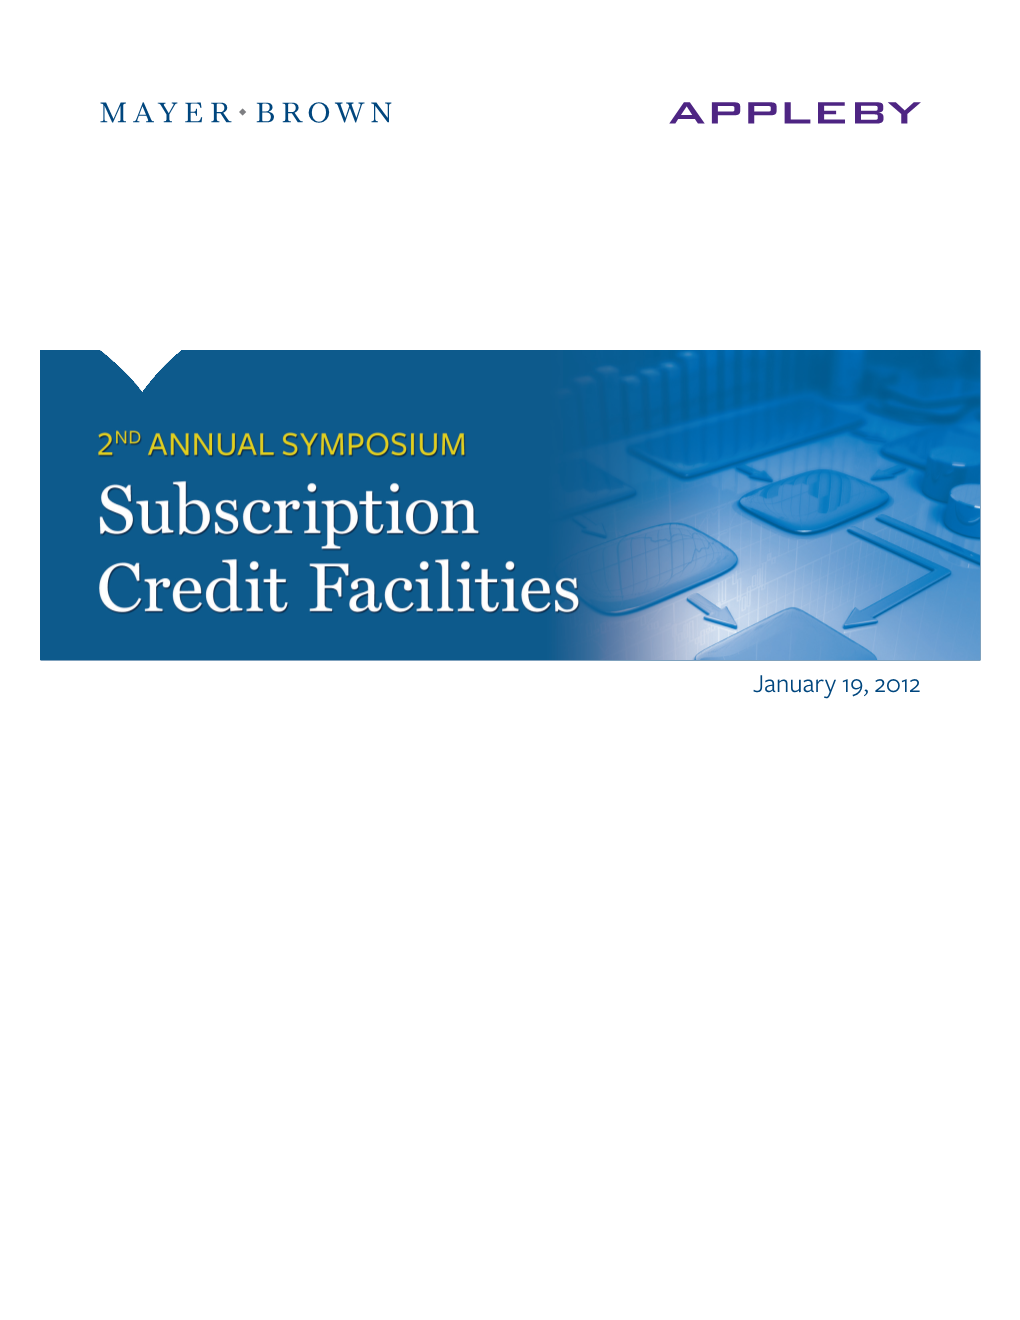 2Nd Annual Subscription Credit Facility Symposium